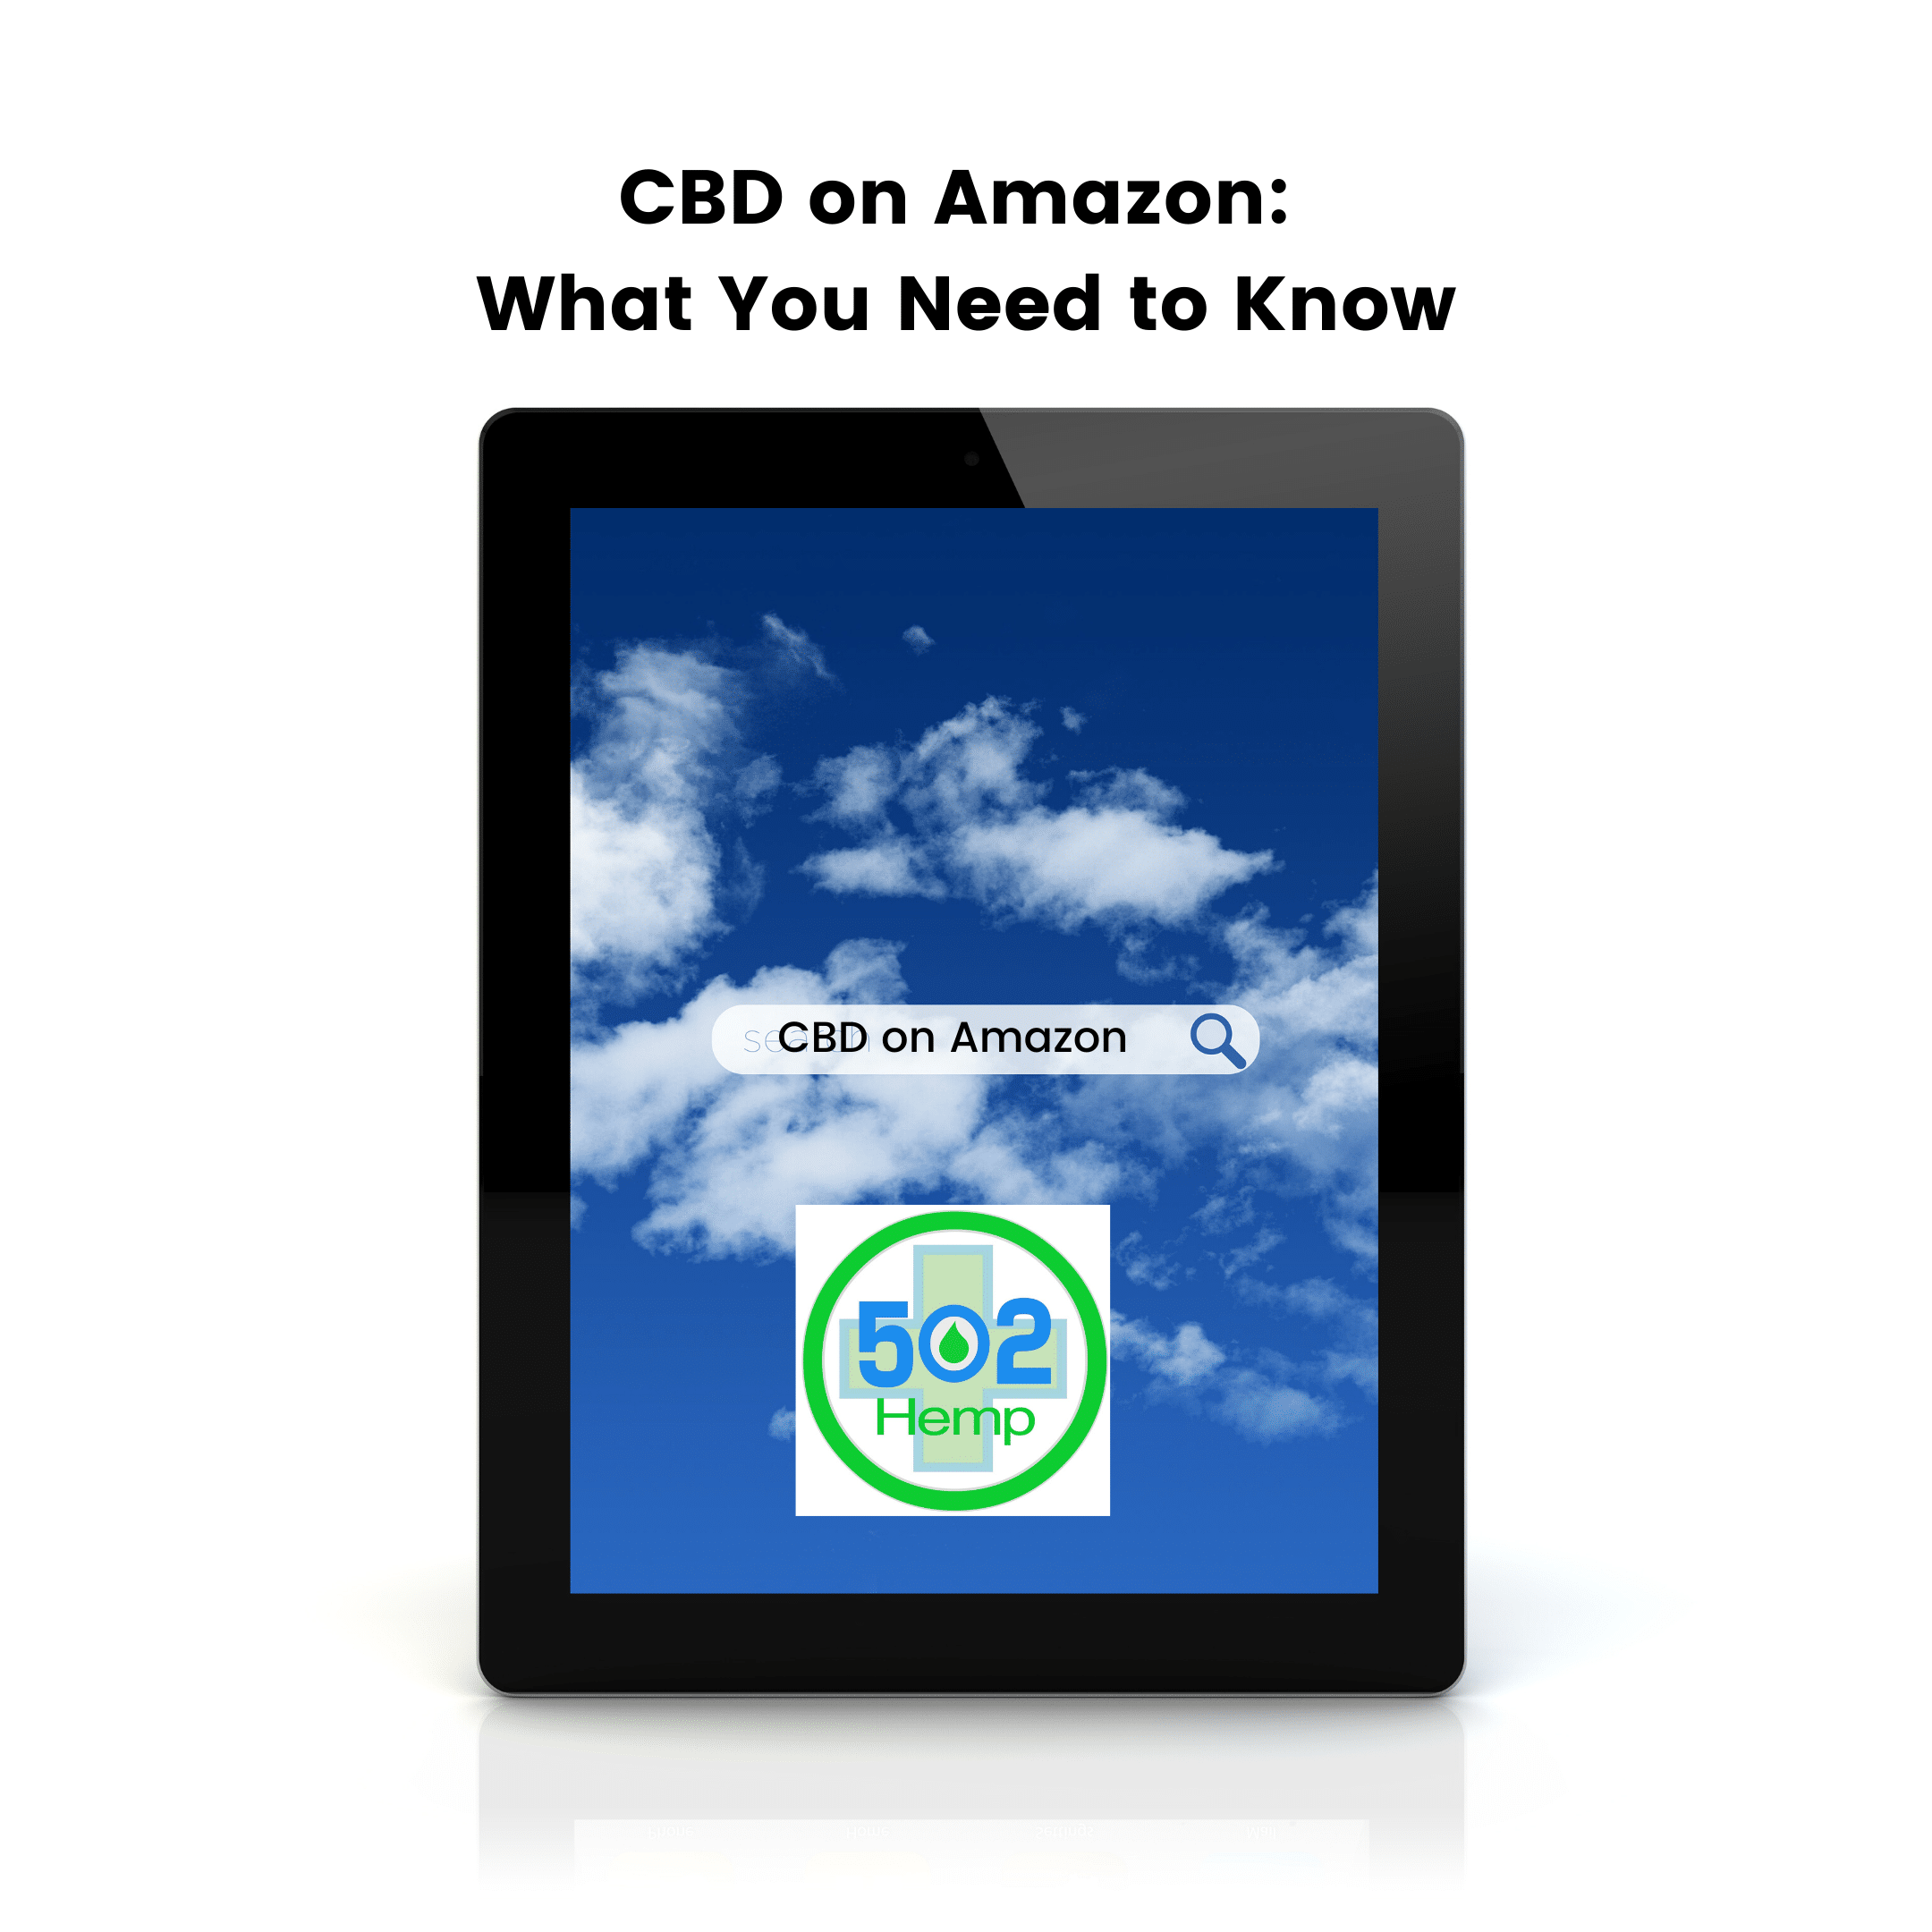 CBD on Amazon: What You Need to Know